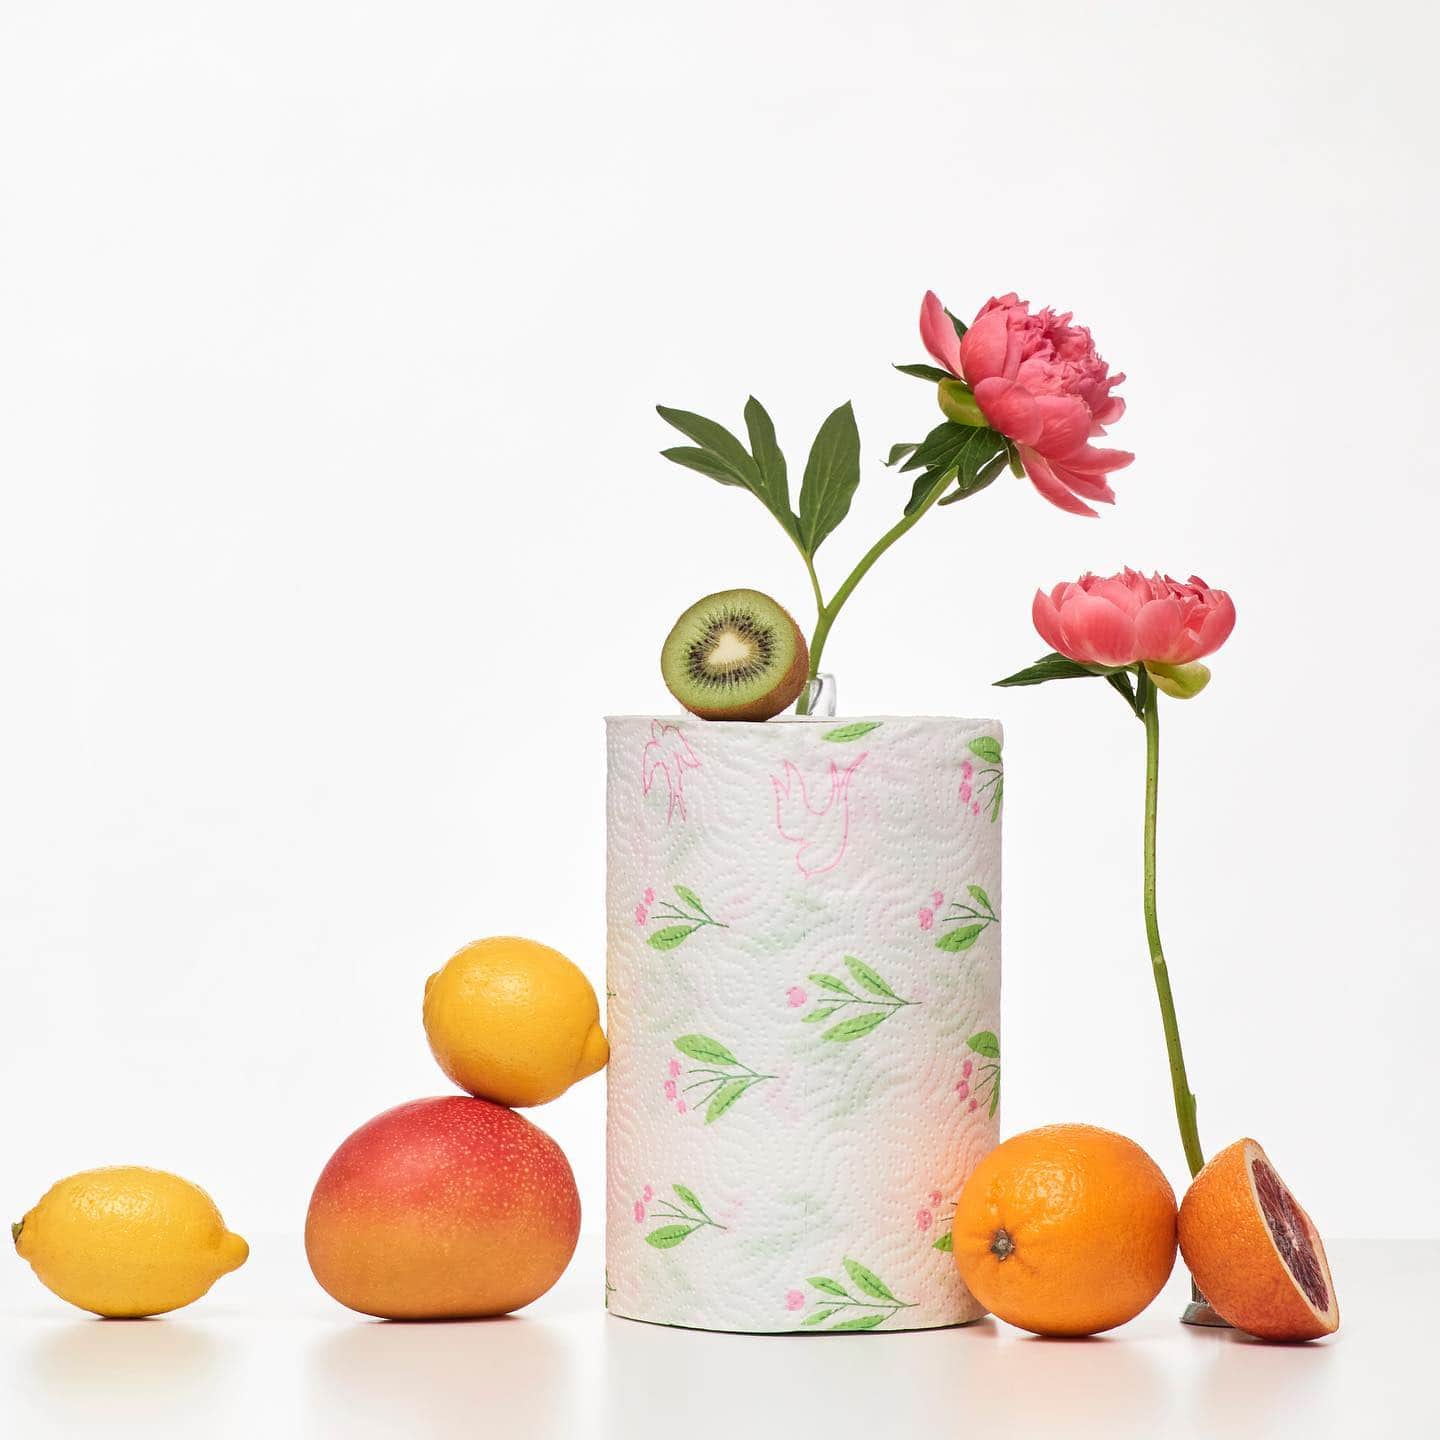 Spring summer seasonal jumbo huge wider taller larger tissue roll paper towel colored soft texture